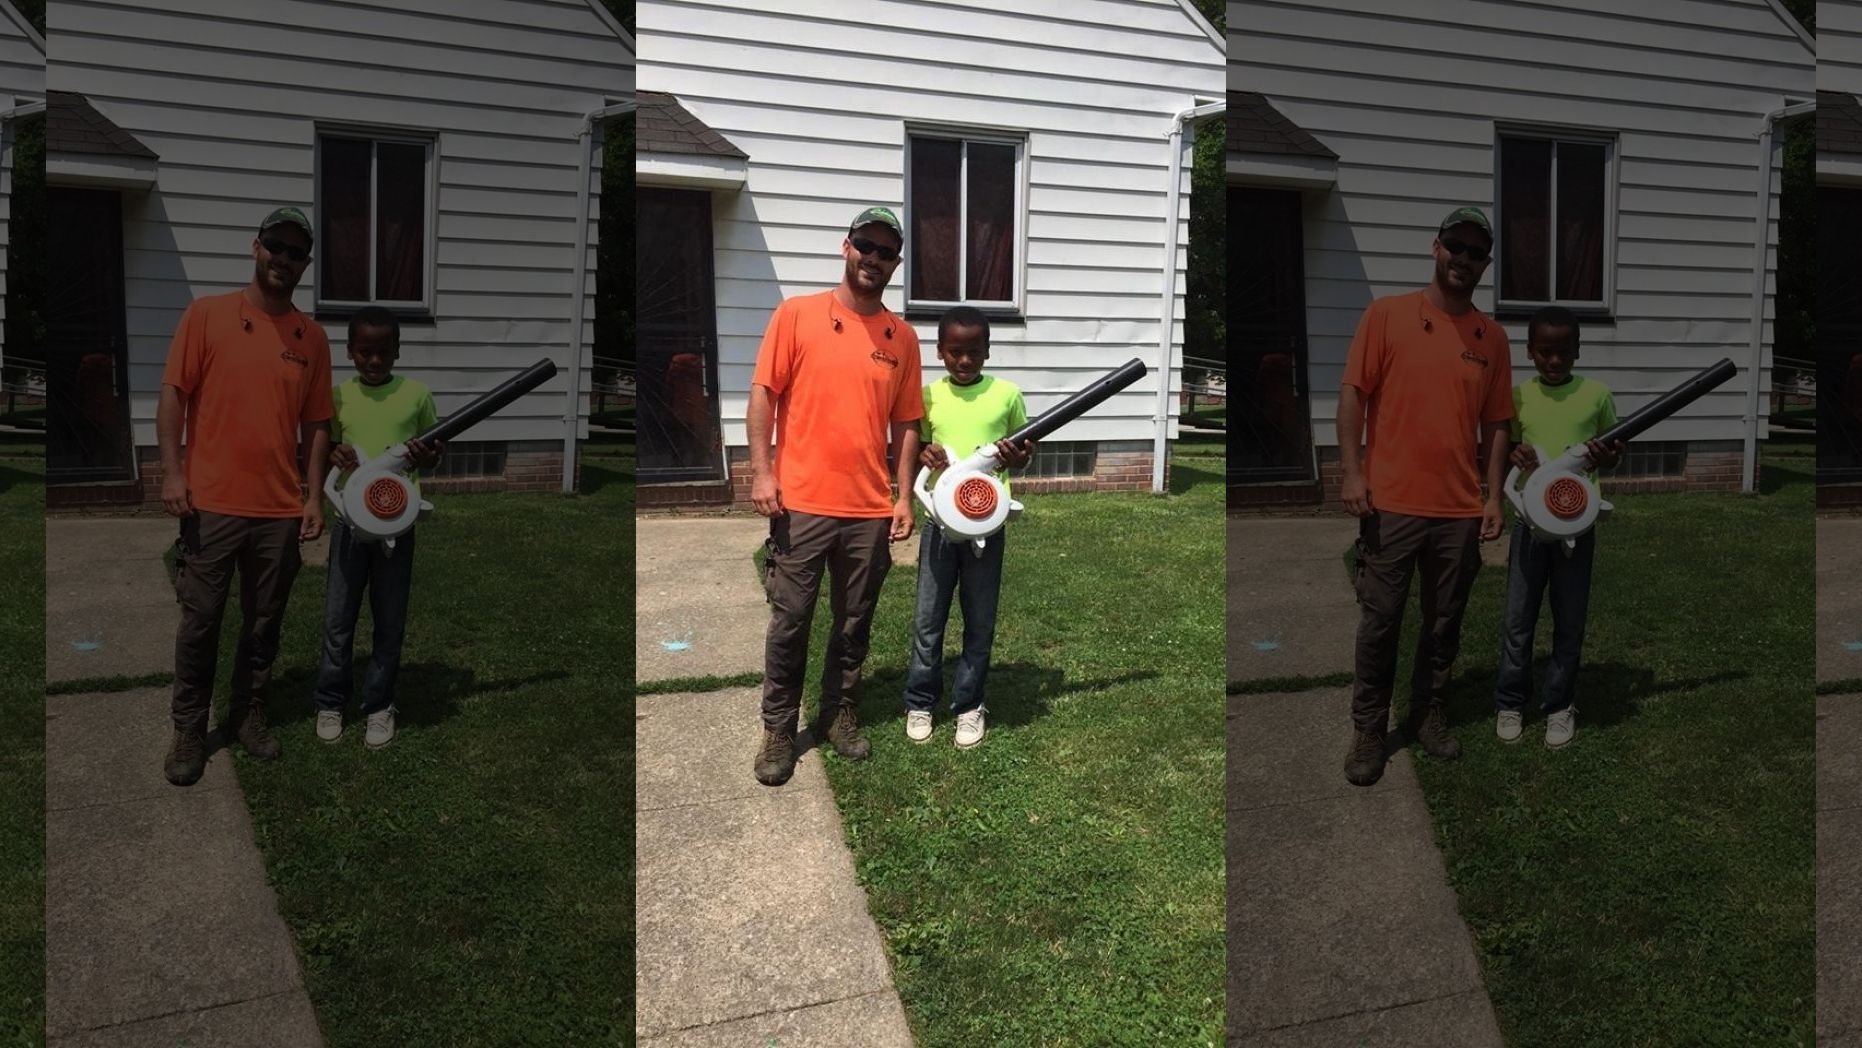 Ohio boy’s lawn care business goes viral after ‘ridiculous’ neighbor calls cops on him